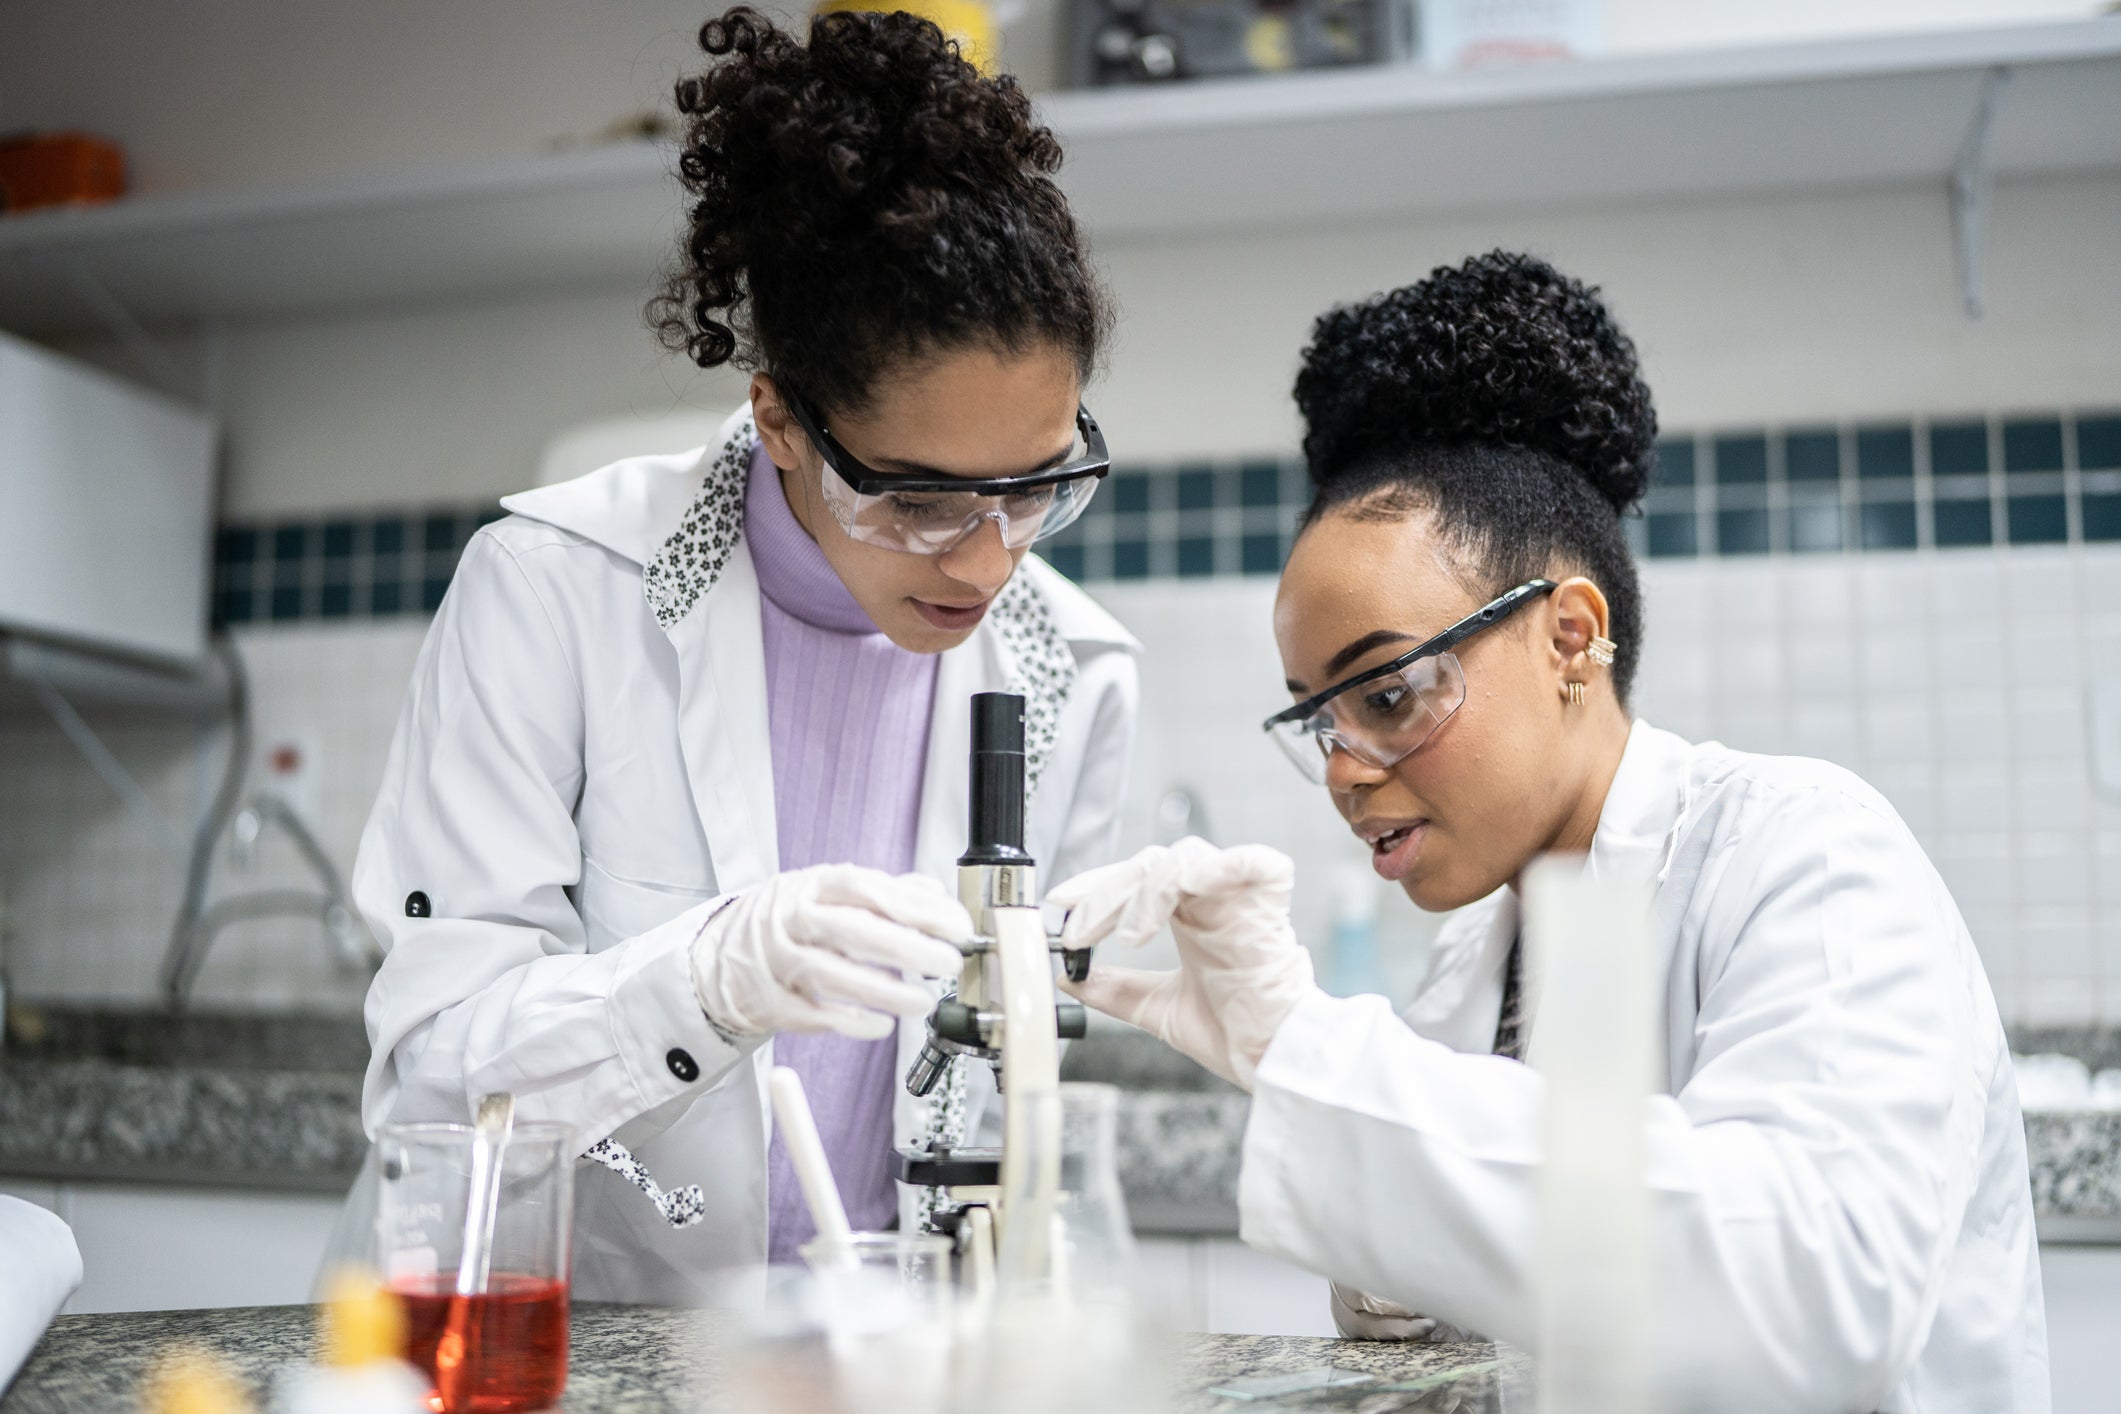 AT&T’s ‘Dream In Black’ And Urban One Partner To Help HBCU Students Find Success In Stem Careers